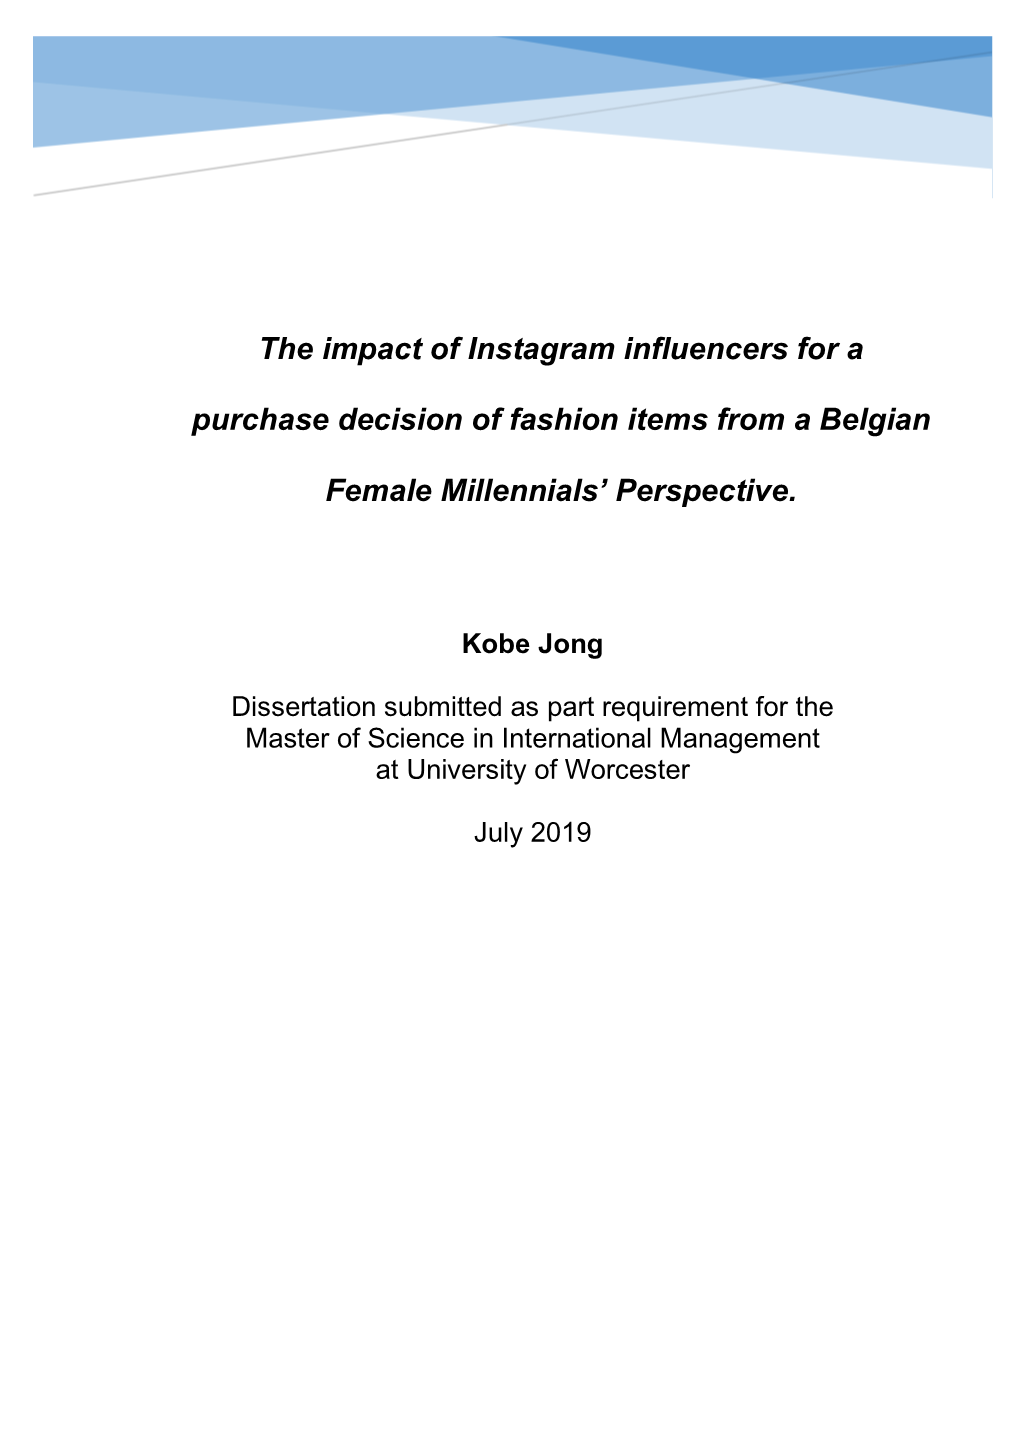 The Impact of Instagram Influencers for a Purchase Decision of Fashion